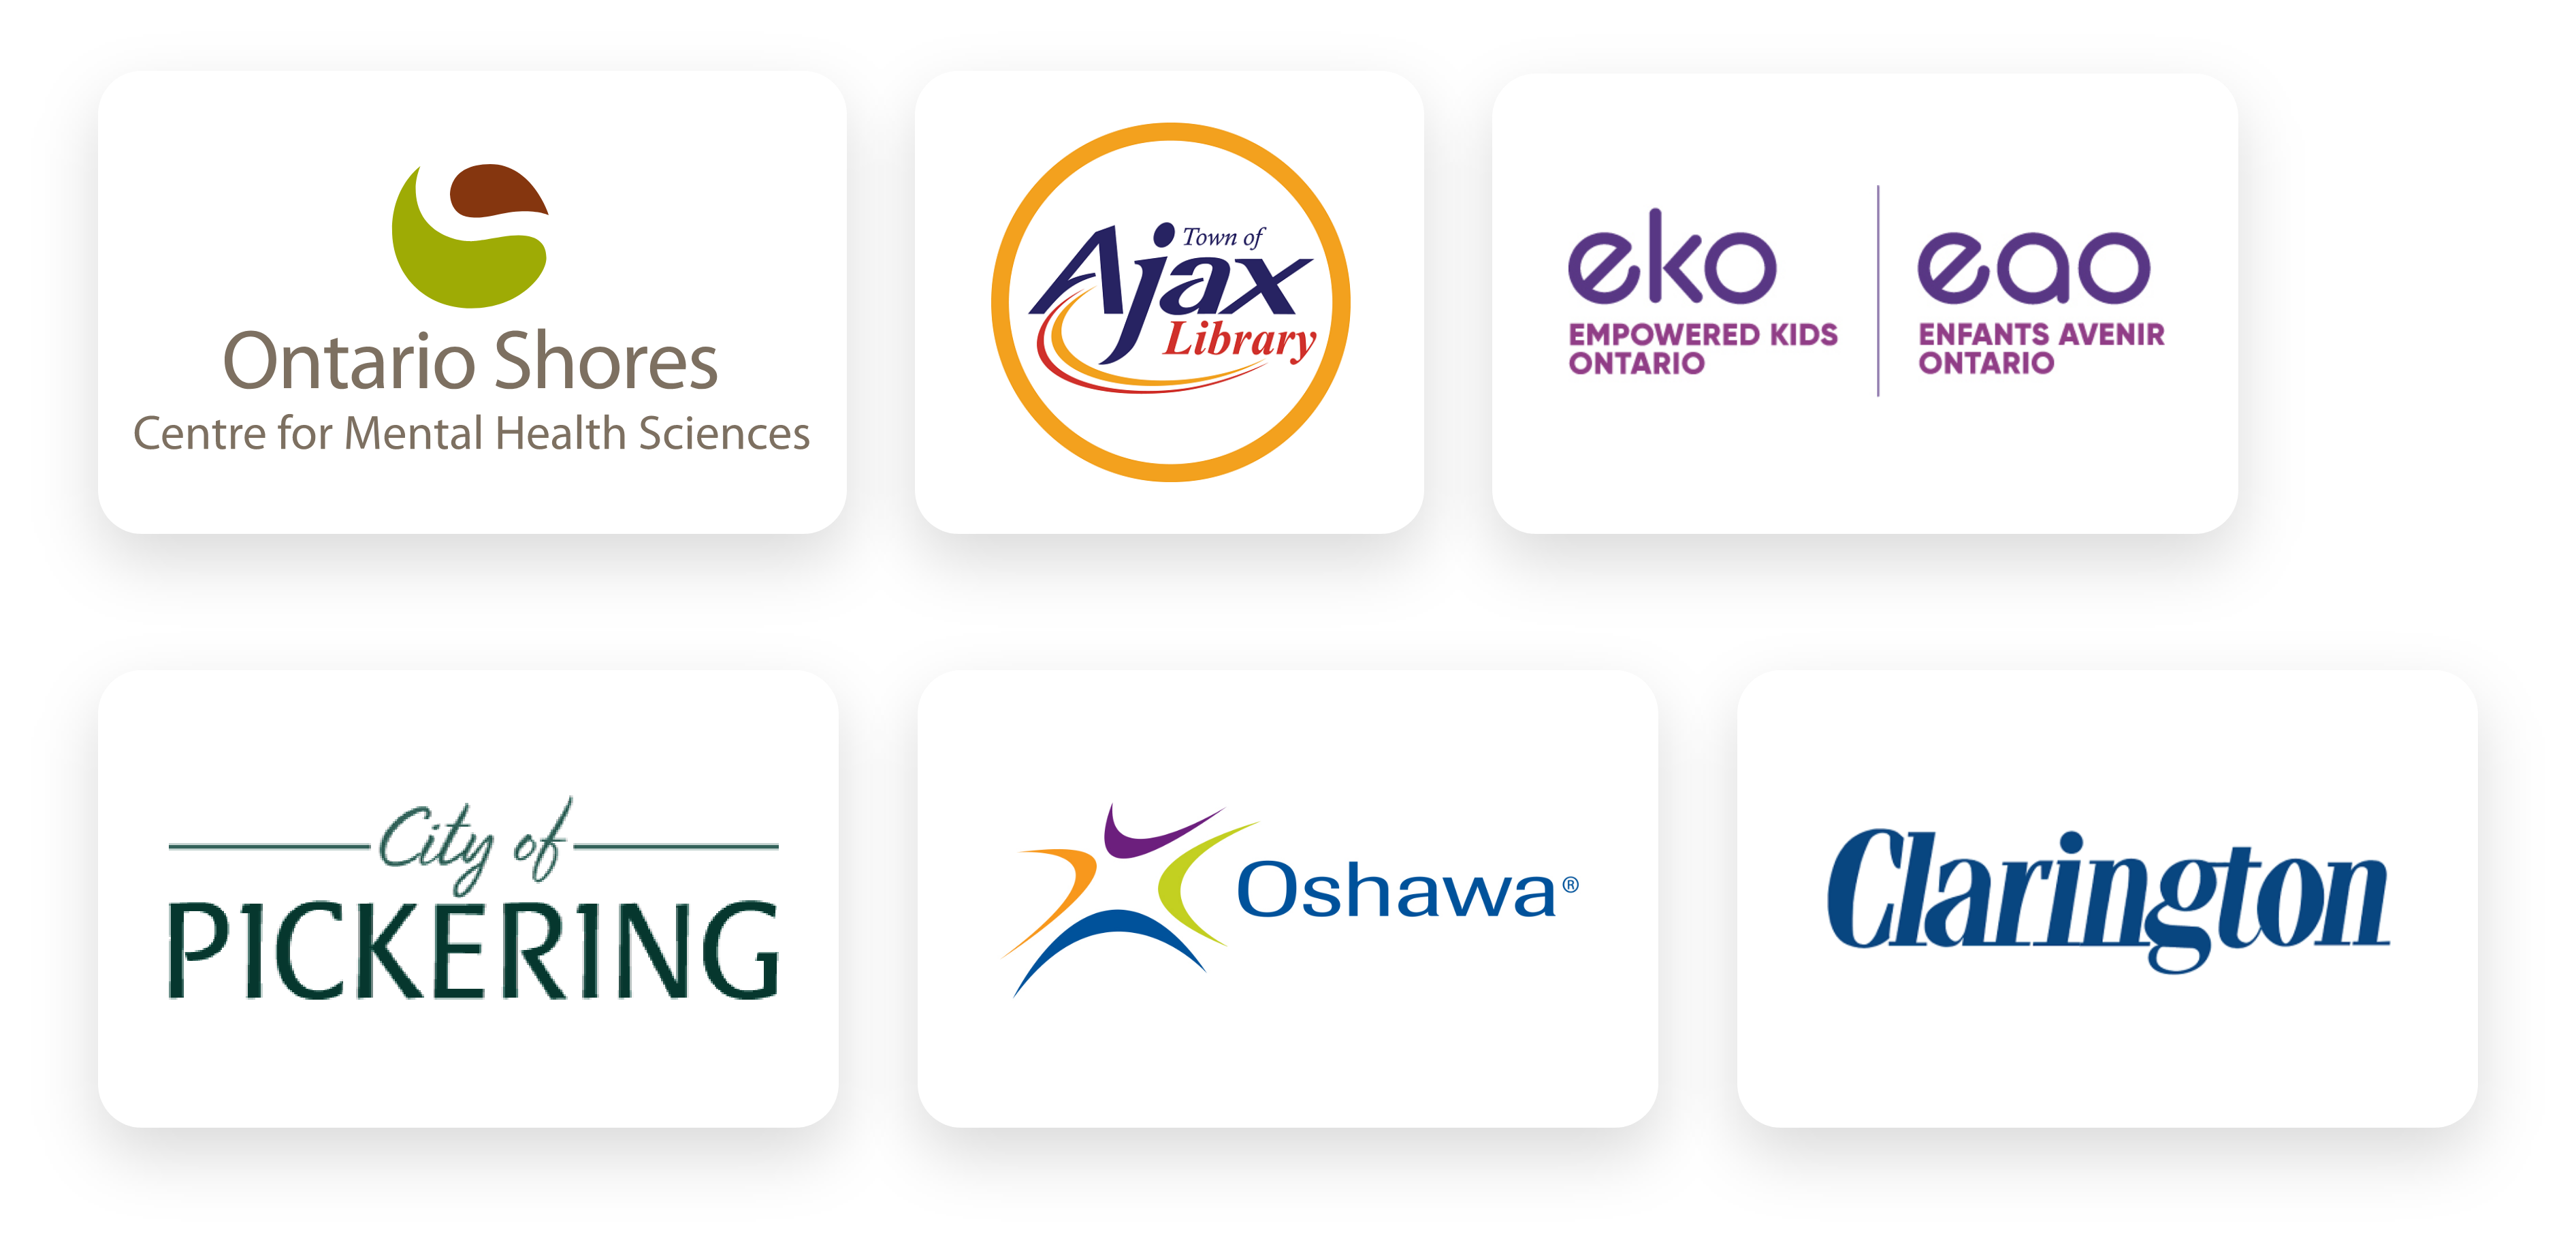 A group of logos showcasing Ontario Shores, The Town of Ajax, Empowered Kids Ontario, The City of Pickering, The City of Oshawa, and The Municipality of Clarington.